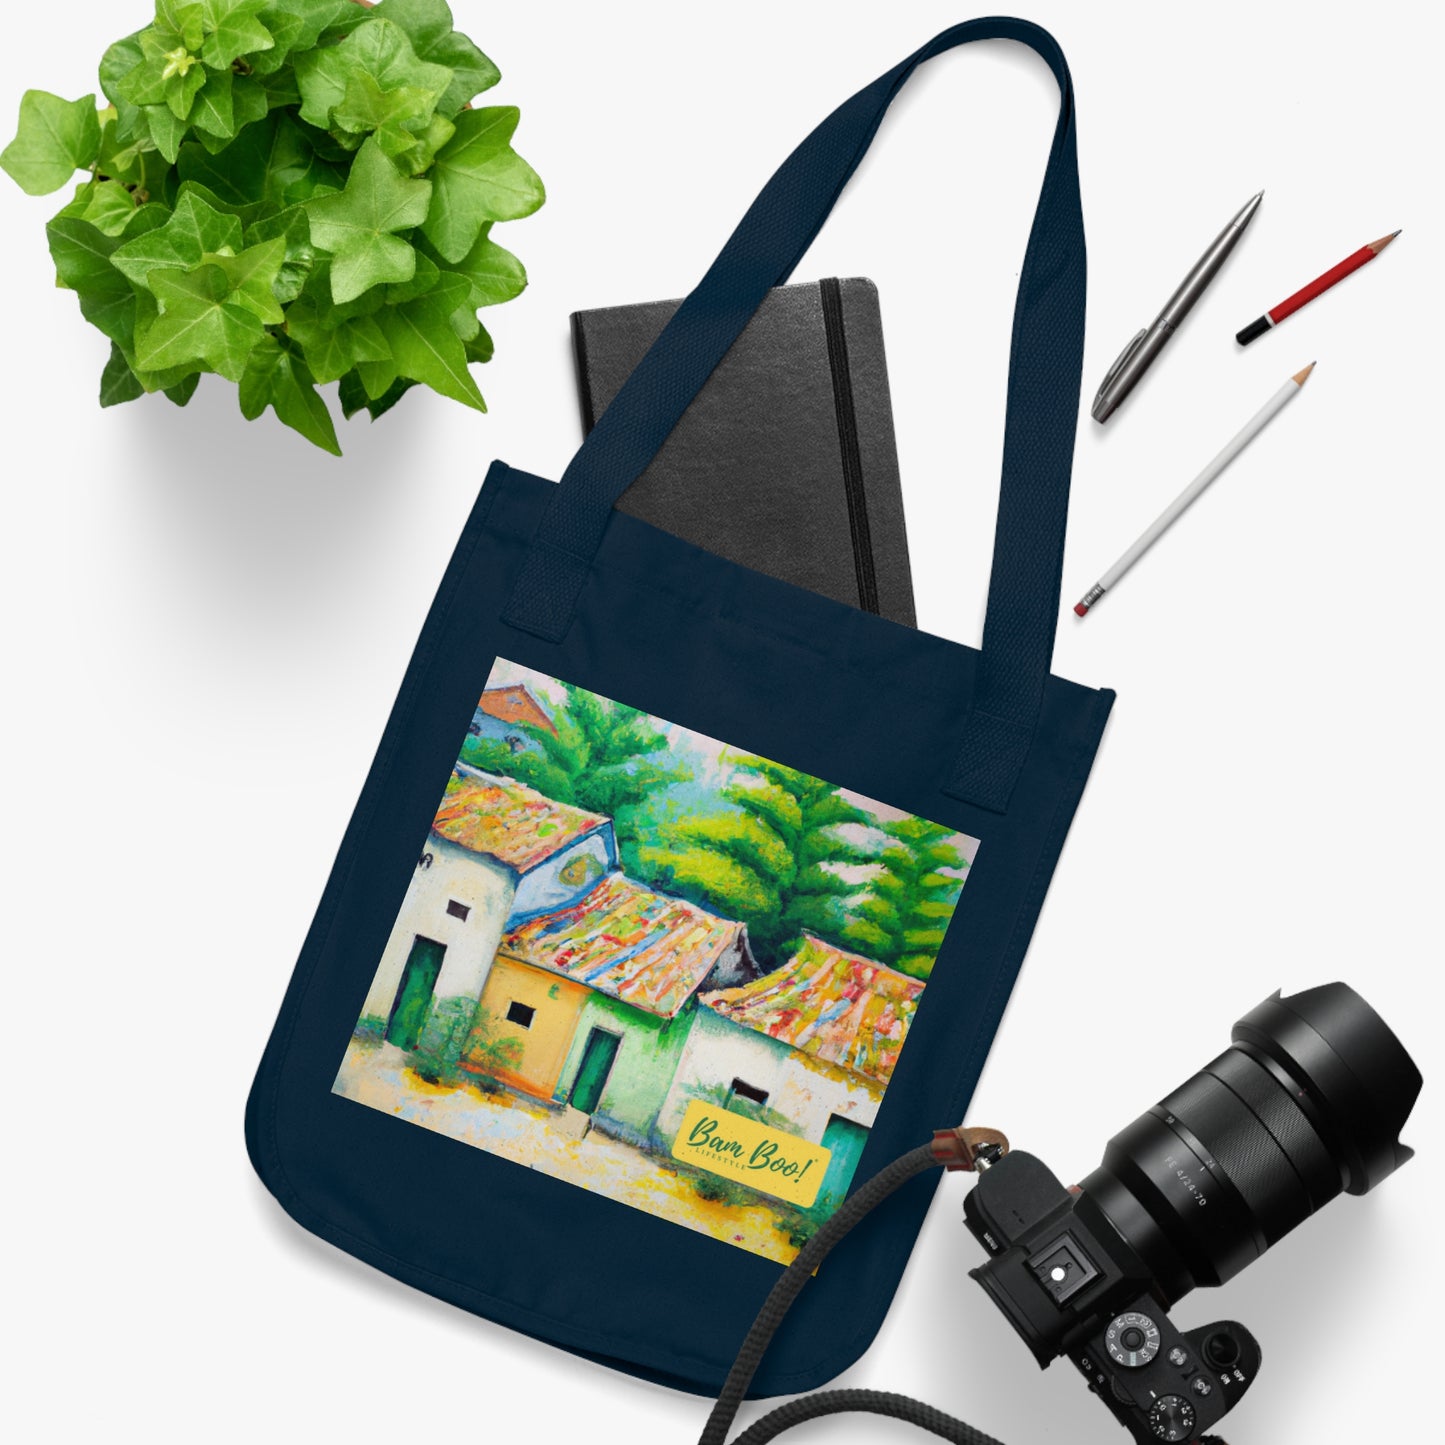 "A Feast For the Eyes: Capturing the Beauty of Nature in Oil." - Bam Boo! Lifestyle Eco-friendly Tote Bag